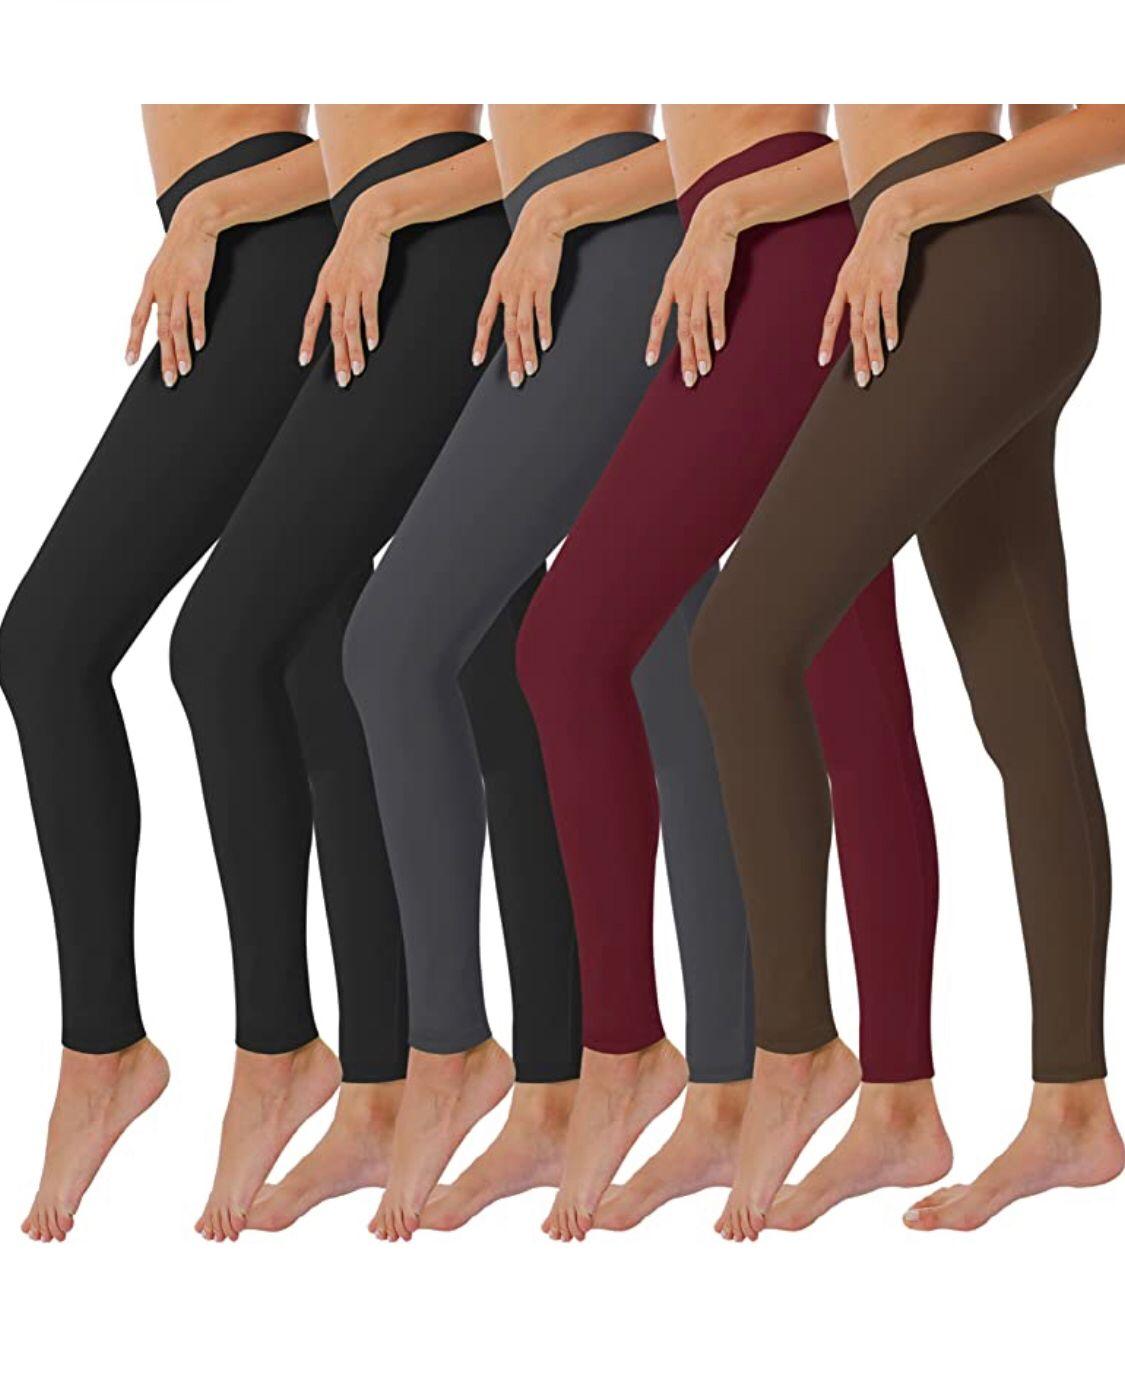  BALEAF Womens Fleece Lined Leggings Thermal Warm Winter  Tights High Waisted Thick Yoga Pants Cold Weather